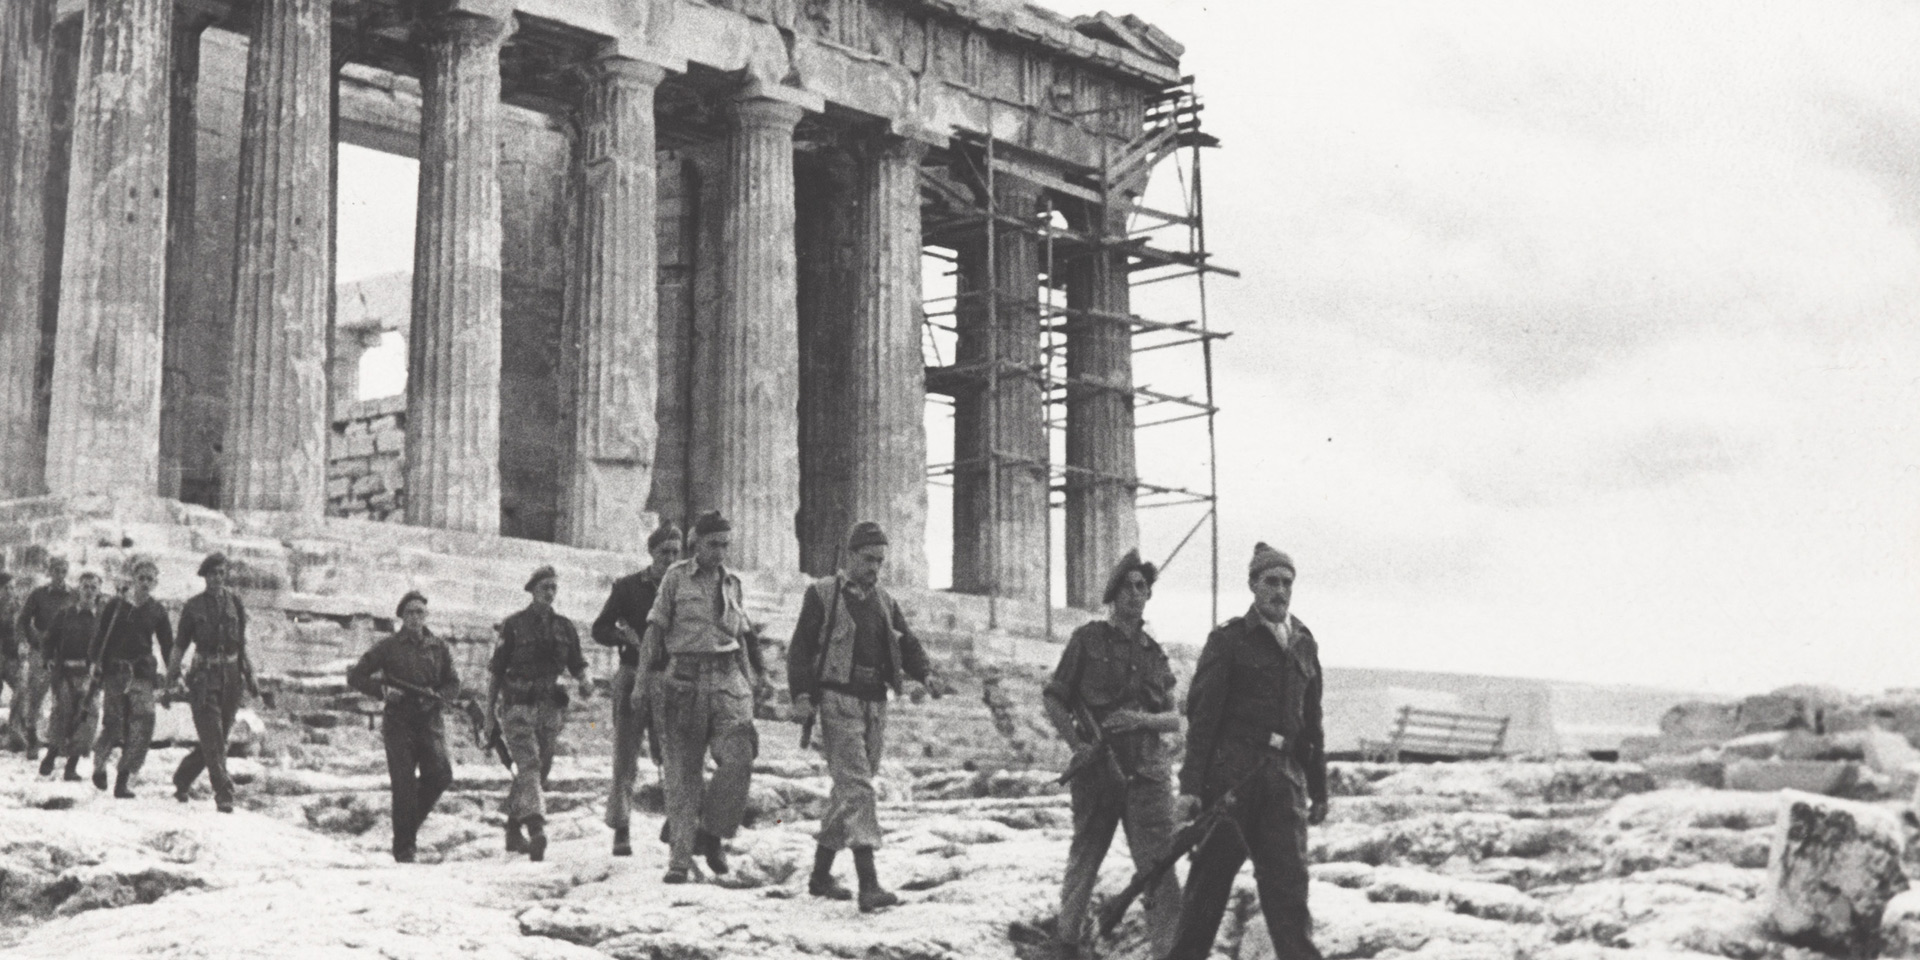 SBS soldiers on the Acropolis in Athens, 1944